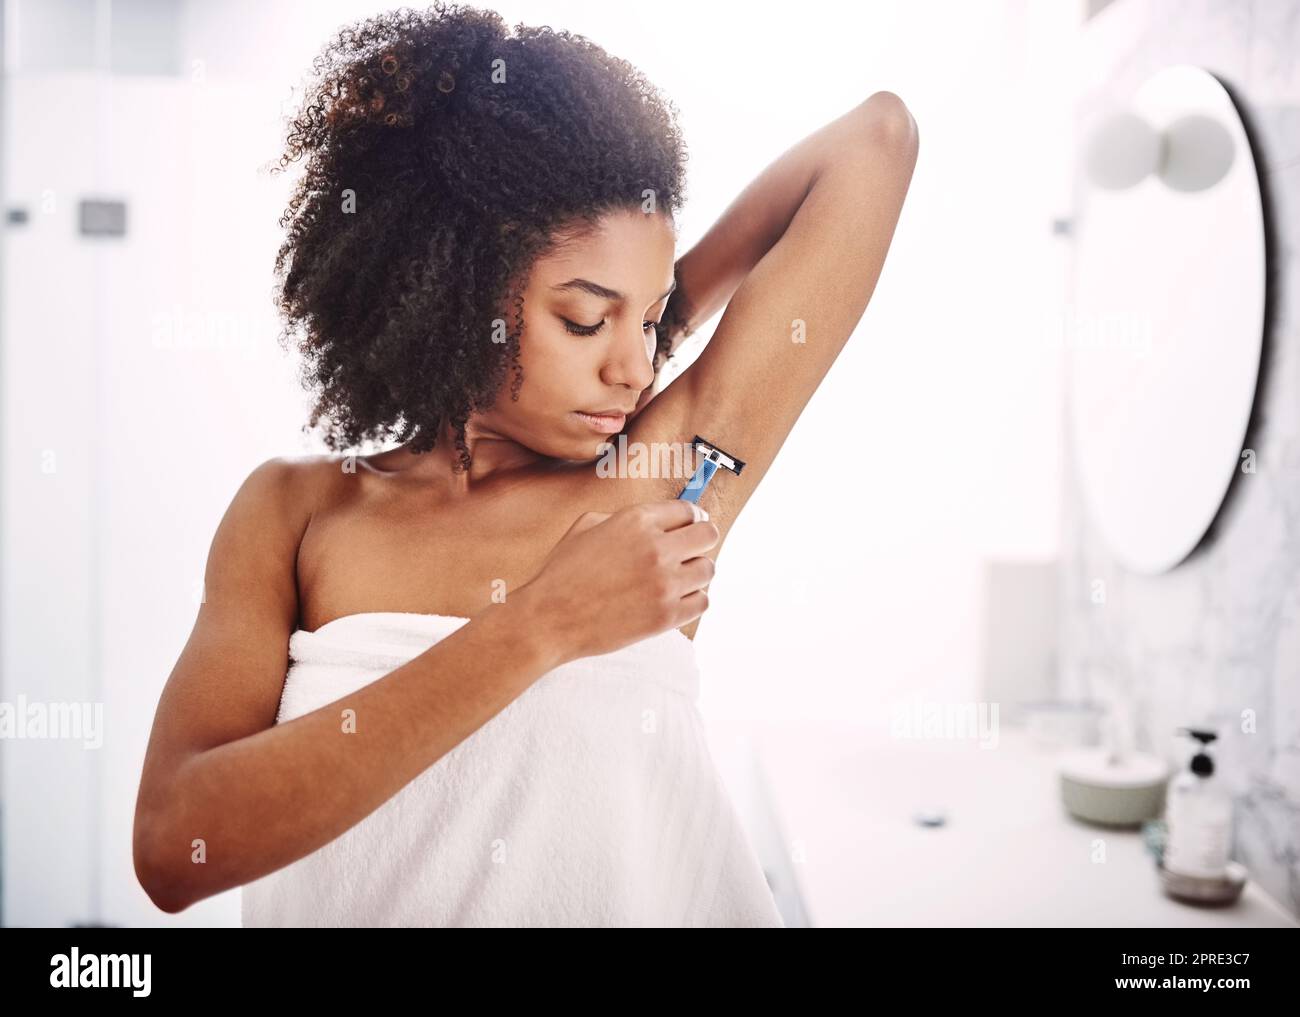 Body care is every womans beauty secret. an attractive young woman shaving her under arms with a razor in the bathroom. Stock Photo